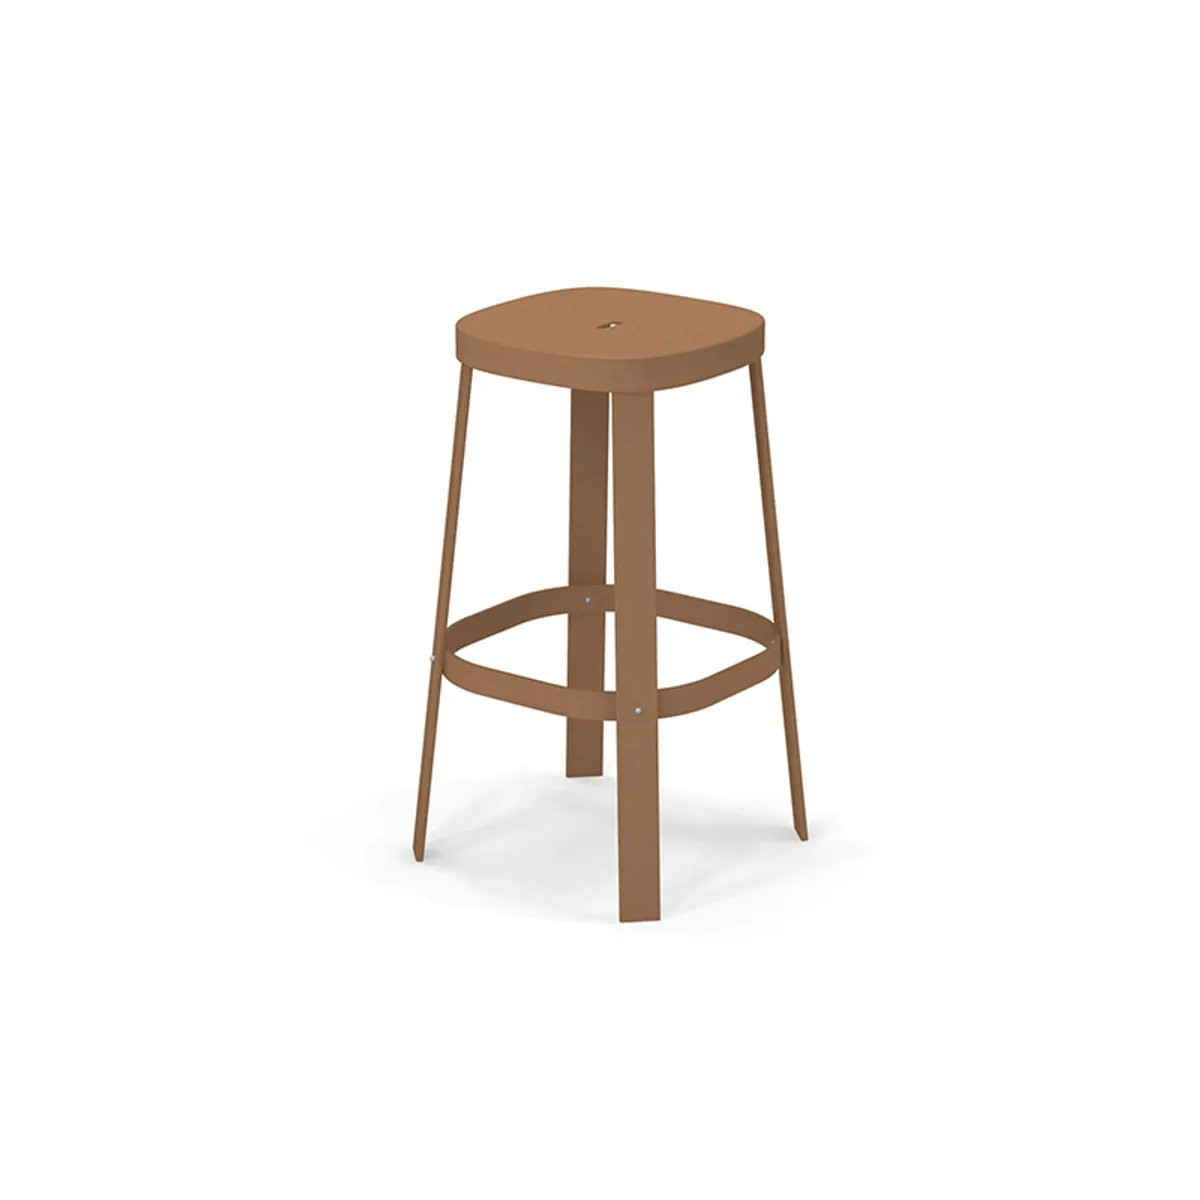 Thor Stool Outdoor Furniture For Hospitality